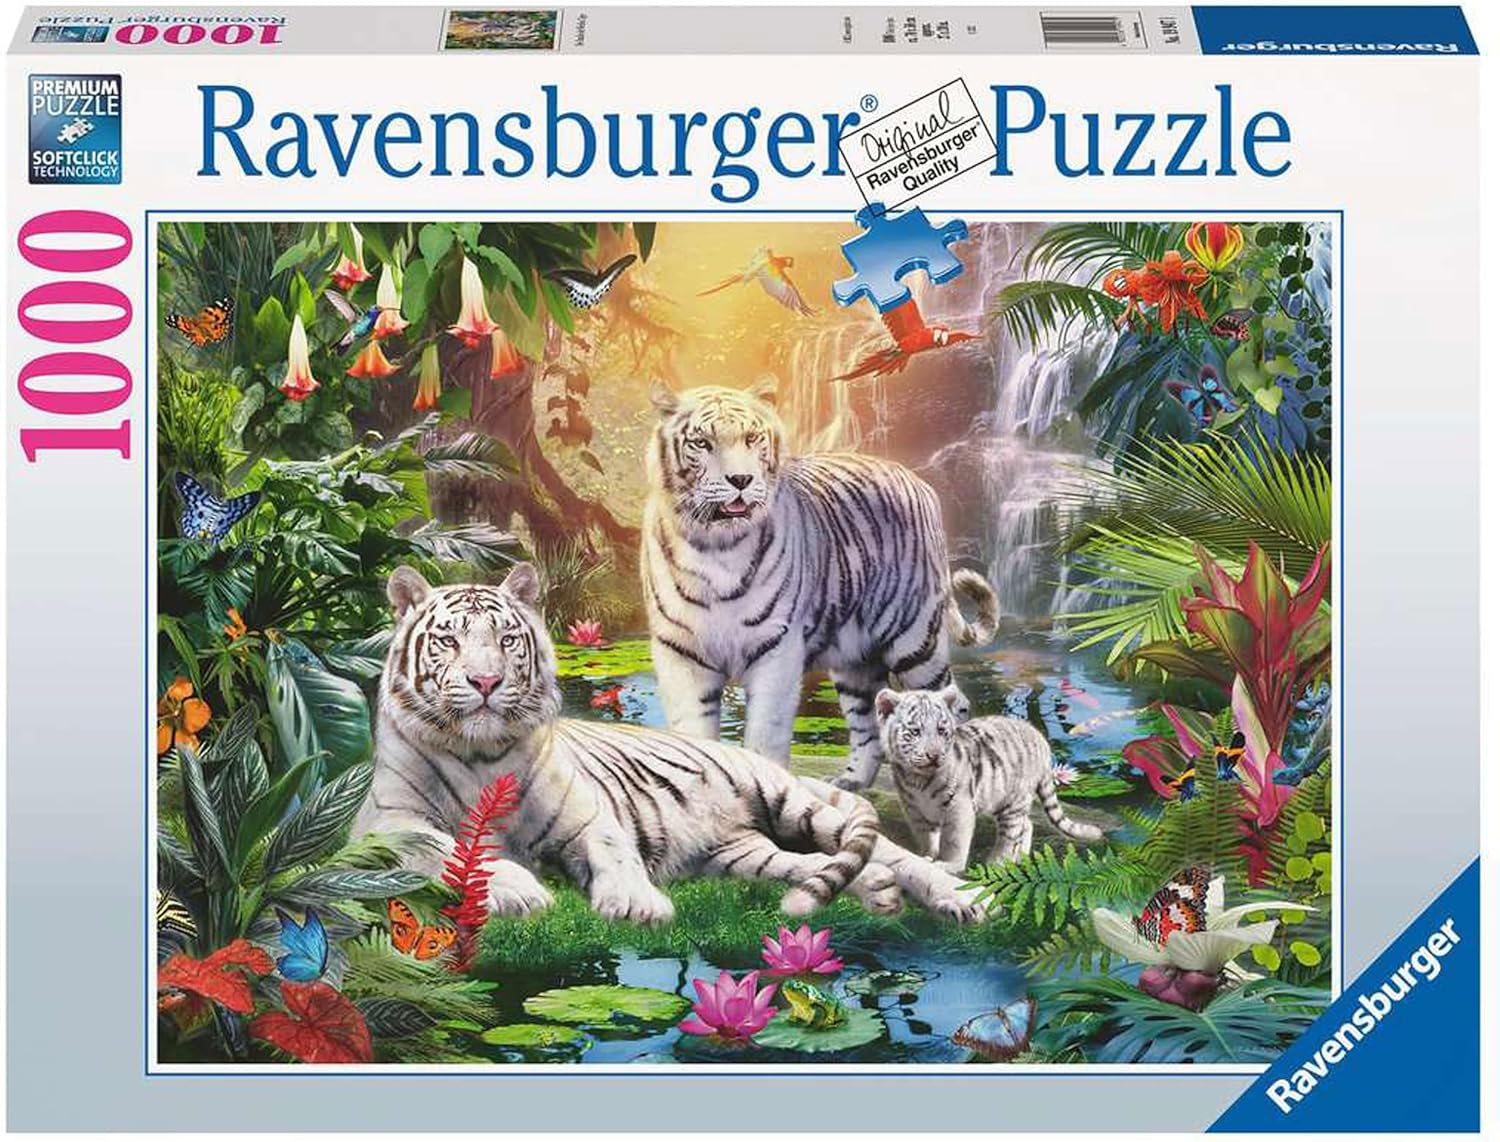 Ravensburger 1000 Piece Jigsaw Puzzle - Family Of White Tigers - 199471